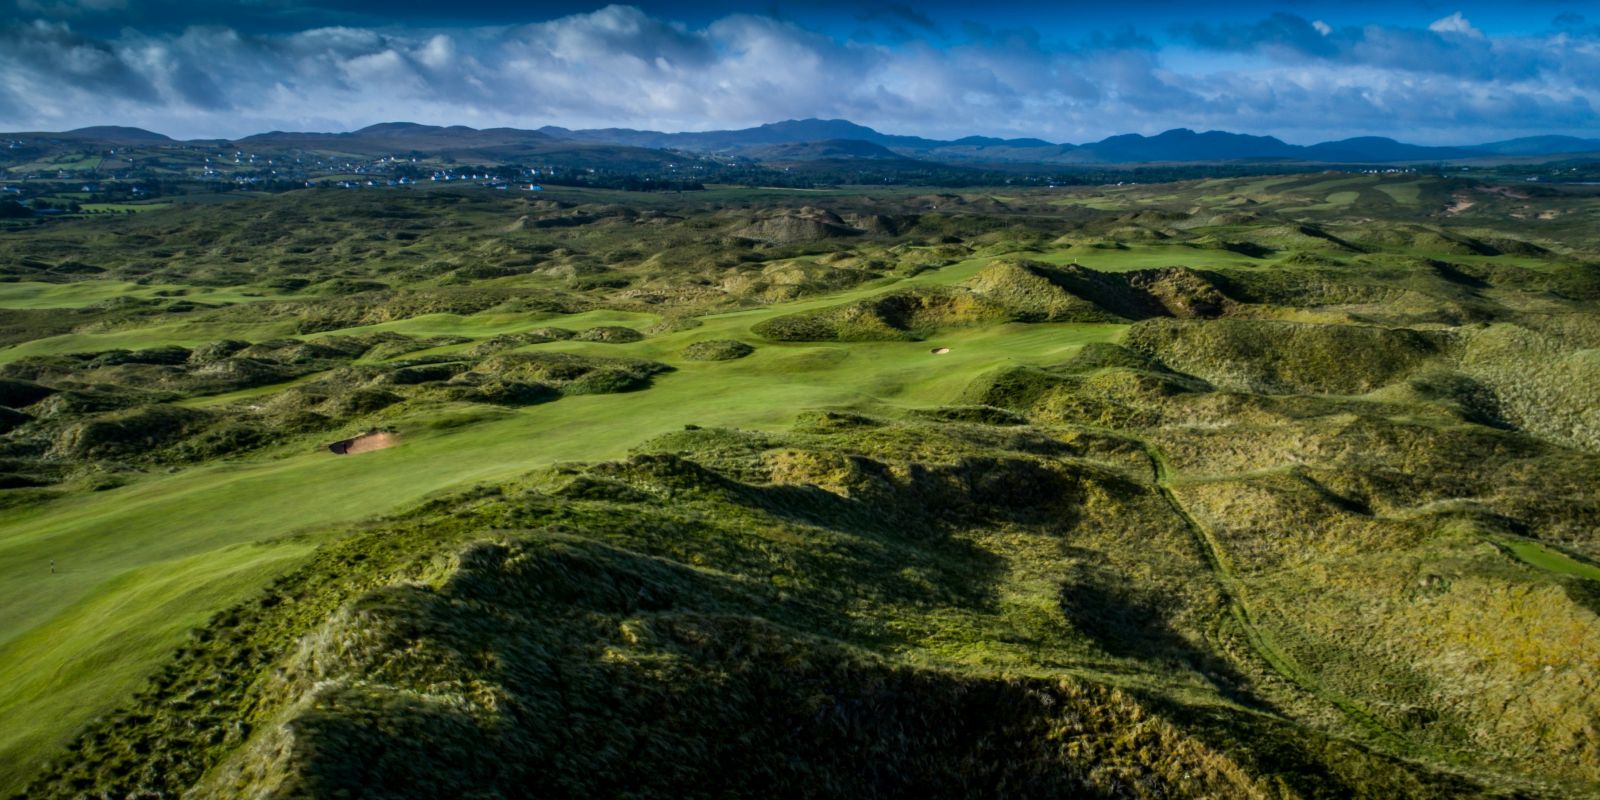 Overlooking the undulating ground of the Old Tom Morris Golf Course fifth fairway at Rosapenna Golf Resort, Ireland